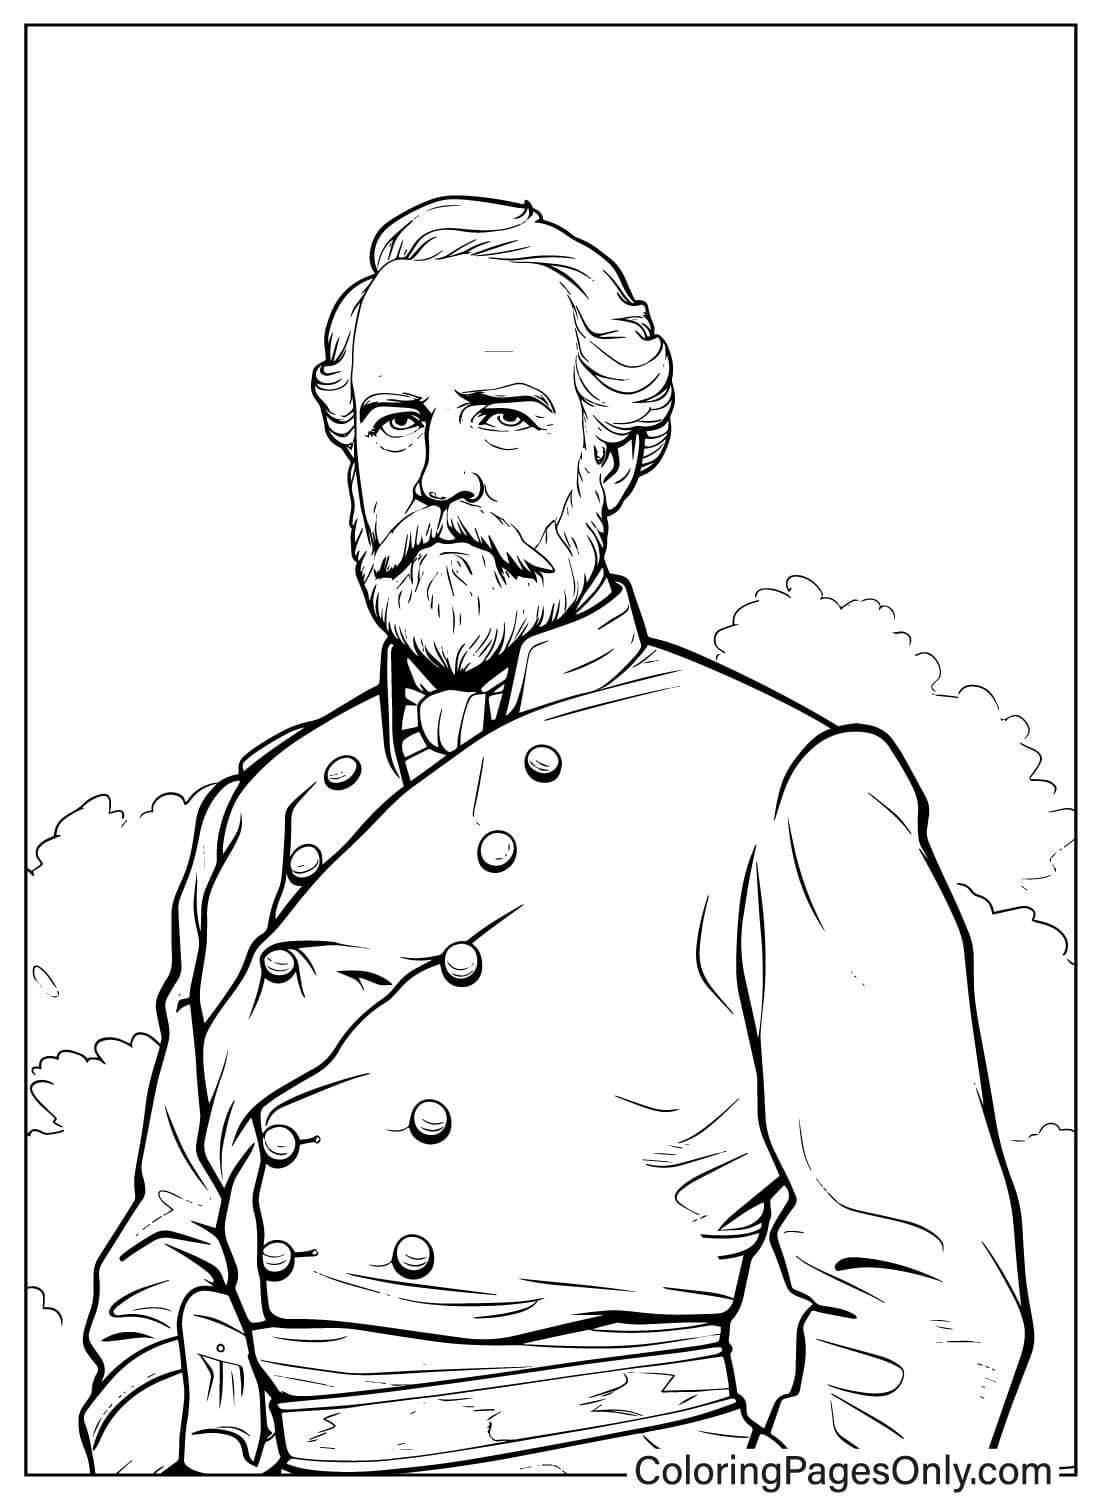 Coloring Sheet Robert E. Lee - Free Printable Coloring Pages